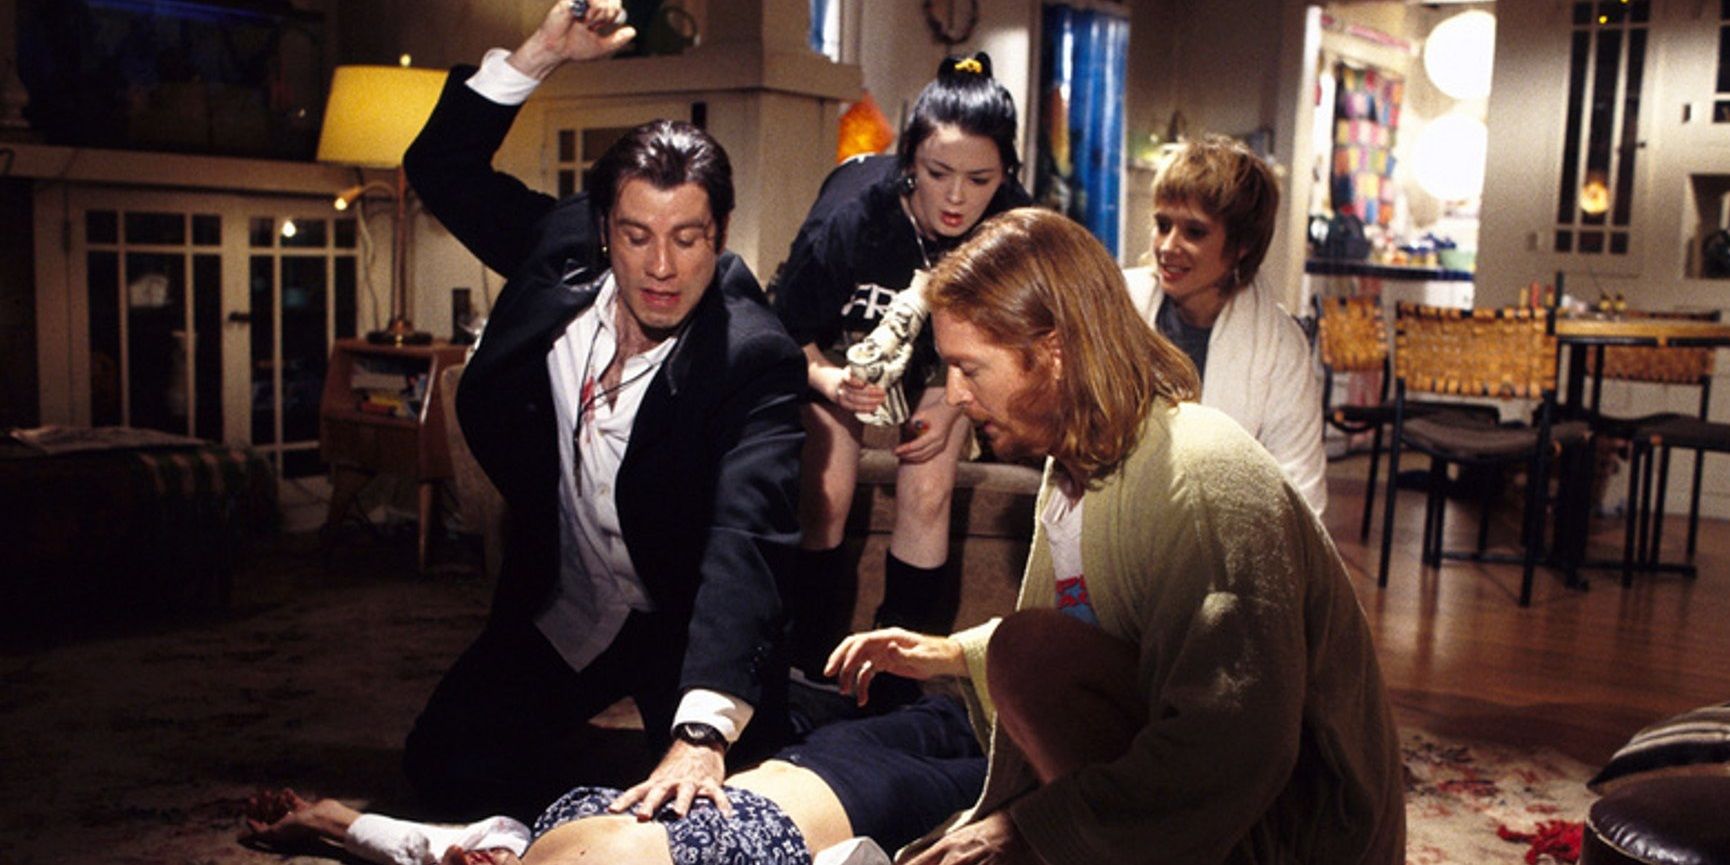 Vincent stabs Mia with an adrenaline shot in Pulp Fiction